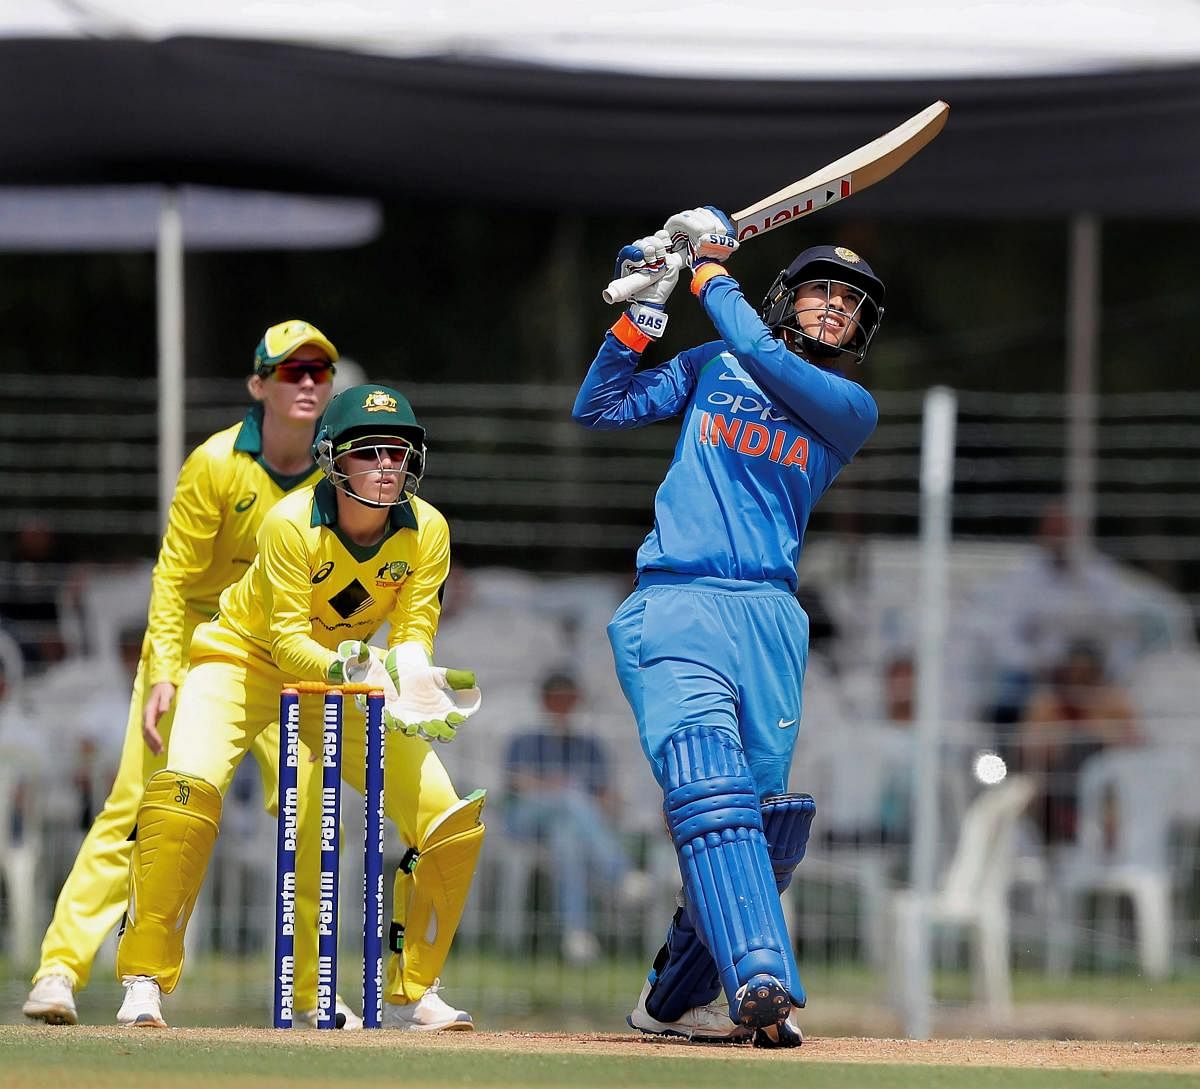 Smriti Mandhana smashed a 60-ball-hundred as she powered Western Storms to an easy seven-wicket win over Lancashire Thunder. PTI FILE PHOTO